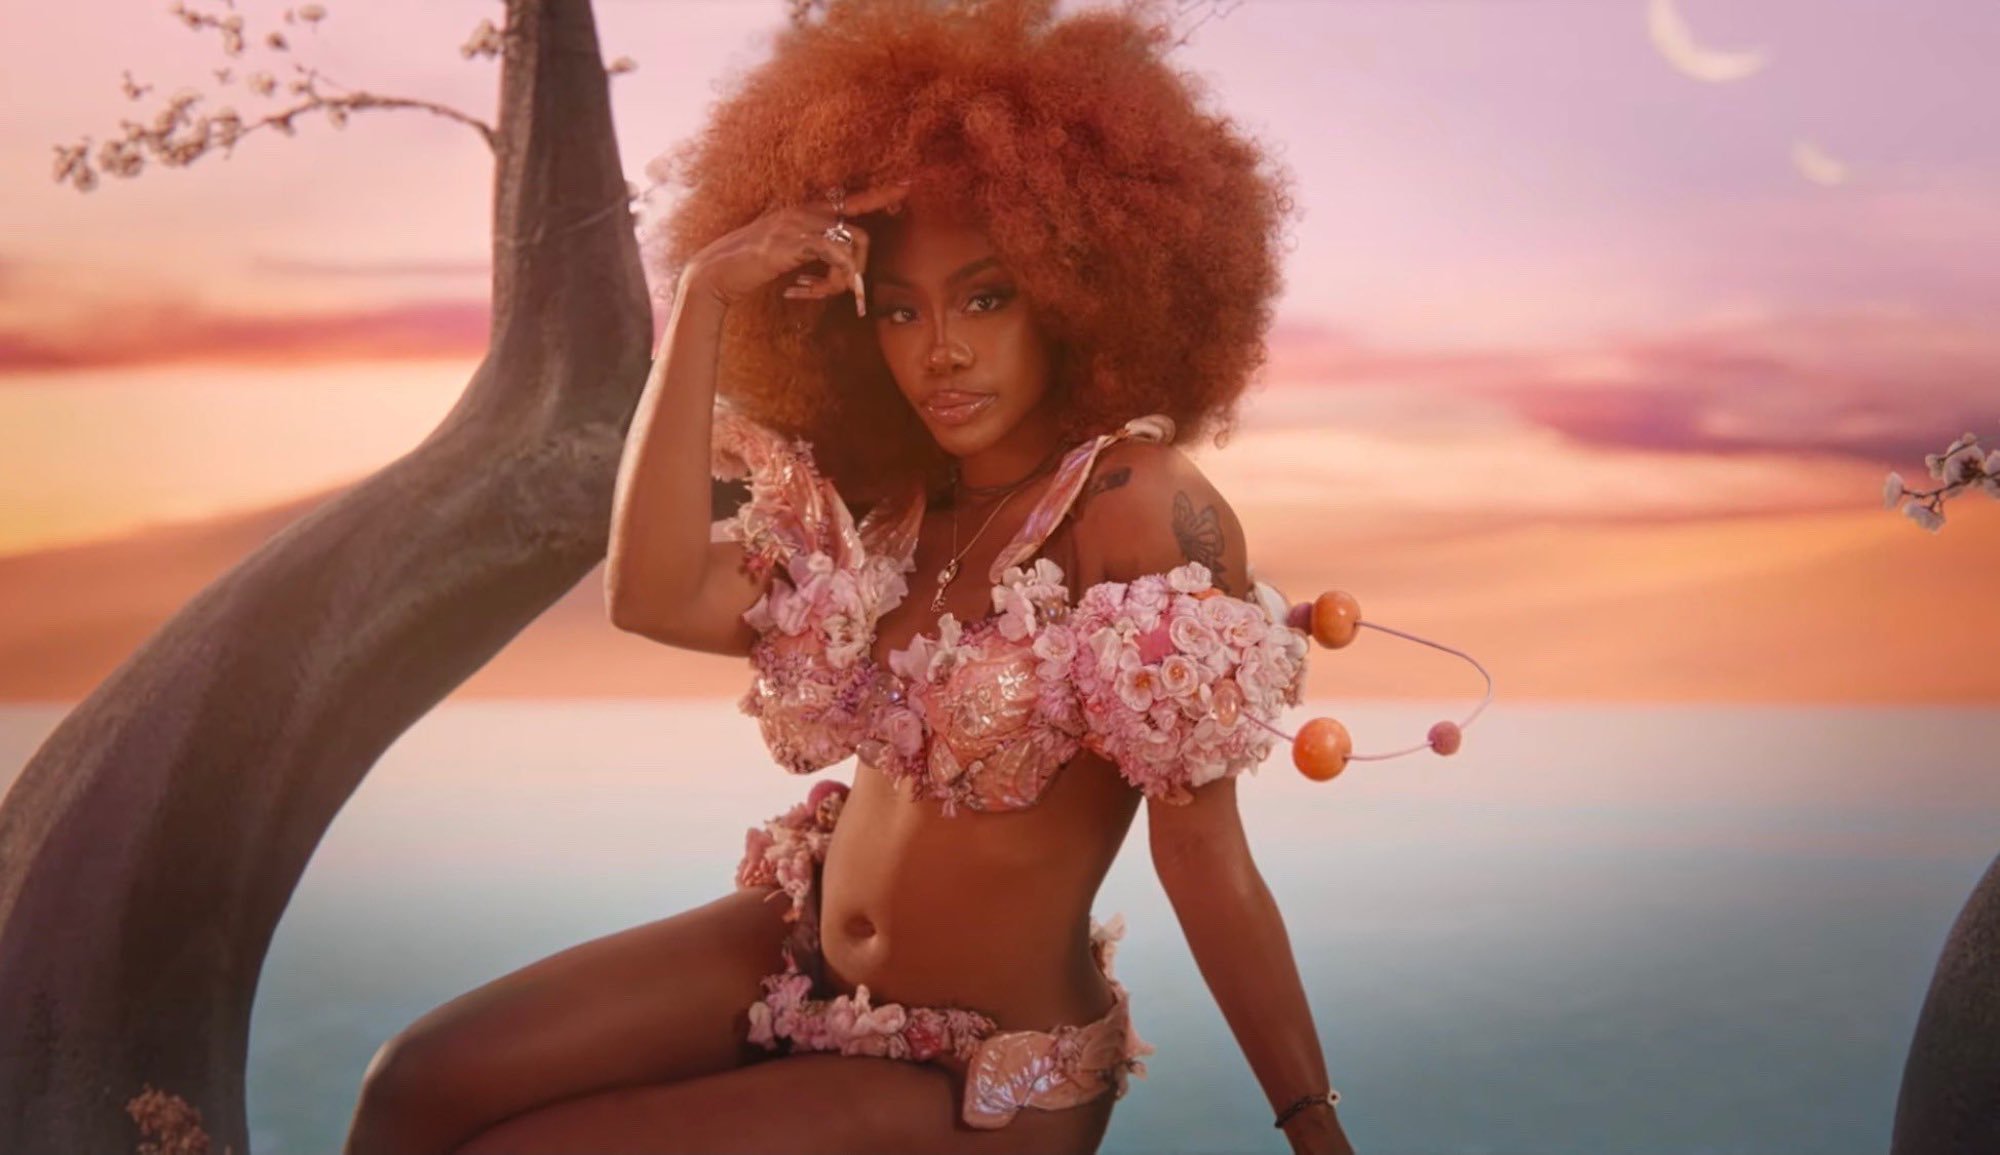 Doja Cat & SZA welcome us to Planet Her on Kiss Me More.